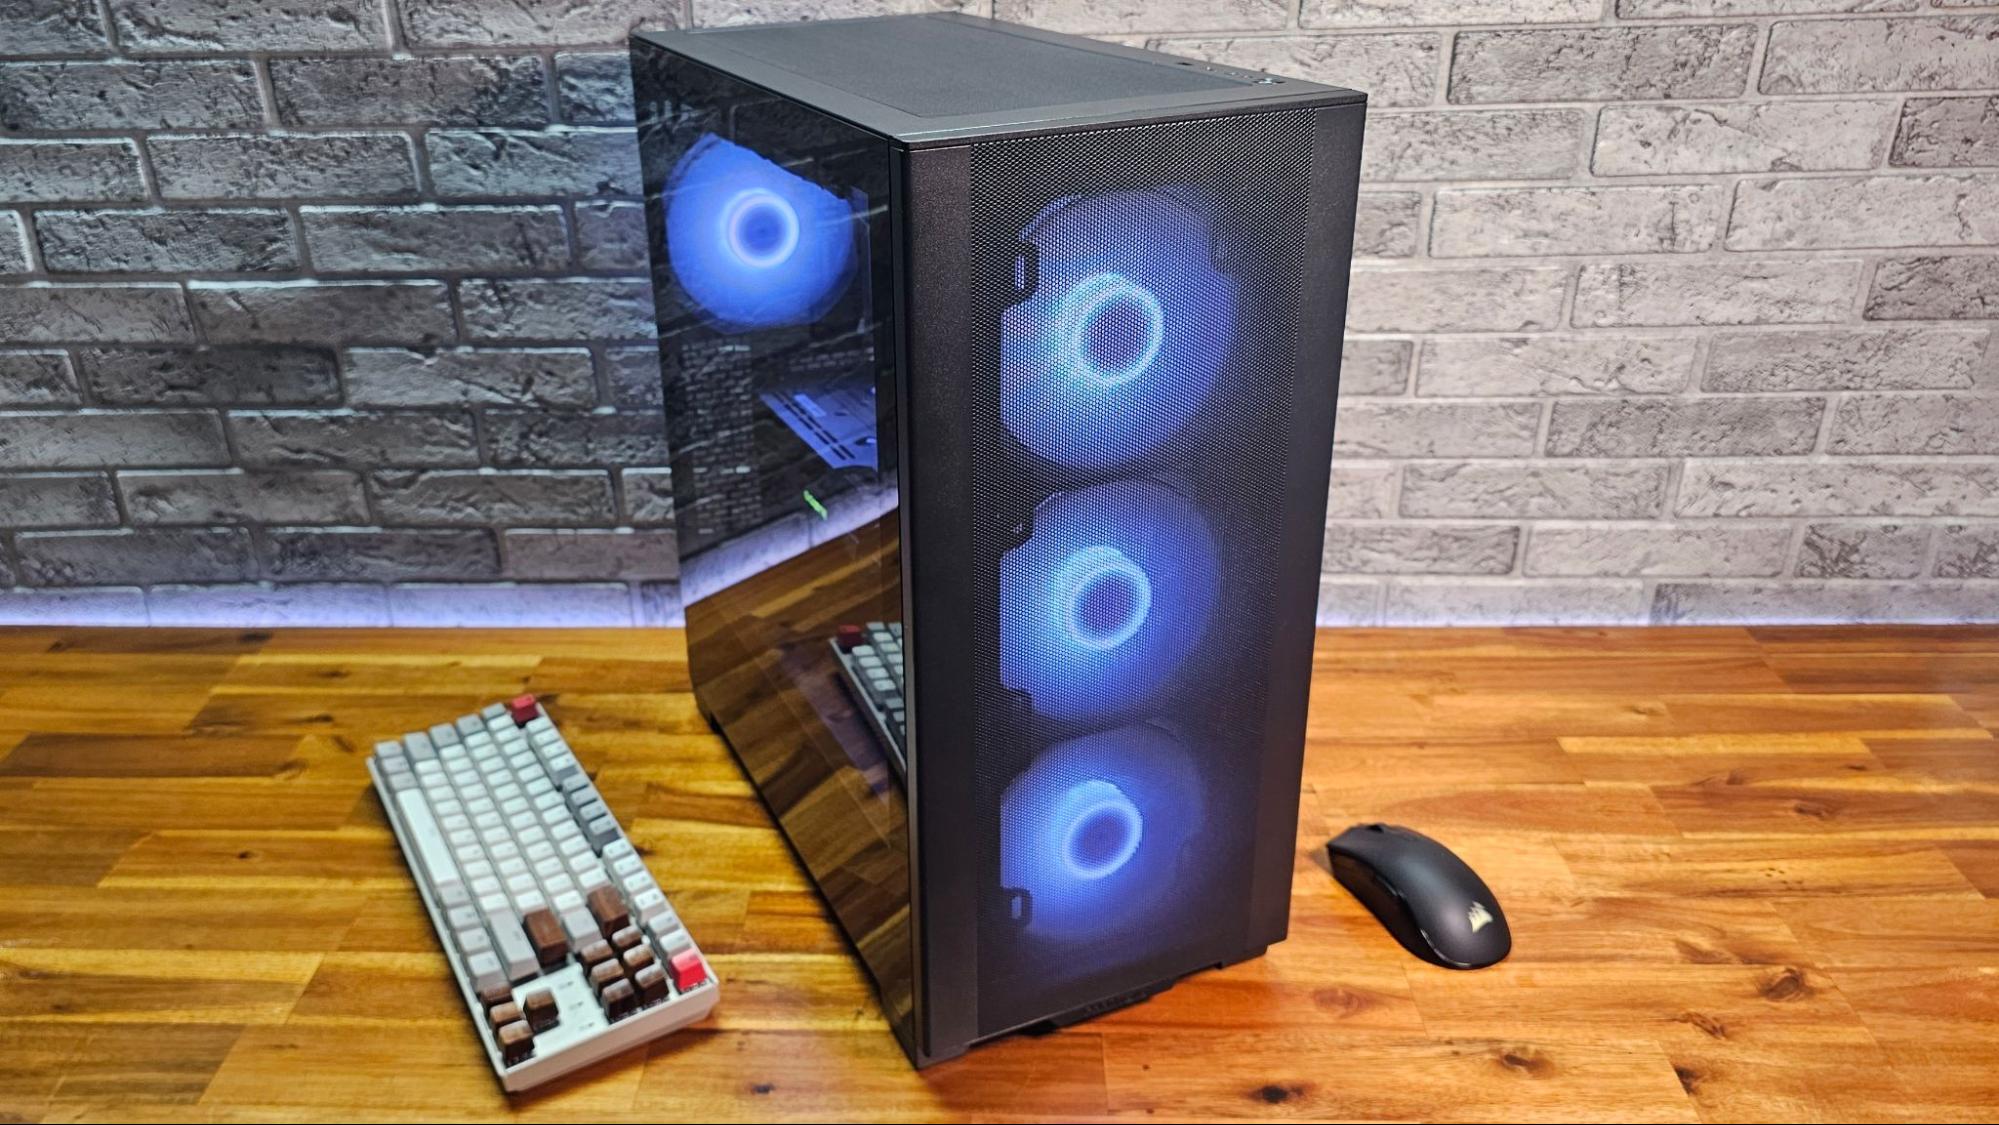 Hands-On with Phanteks' XT Pro Ultra PC case: Modern budget case with lots of airflow and RGB out of the box